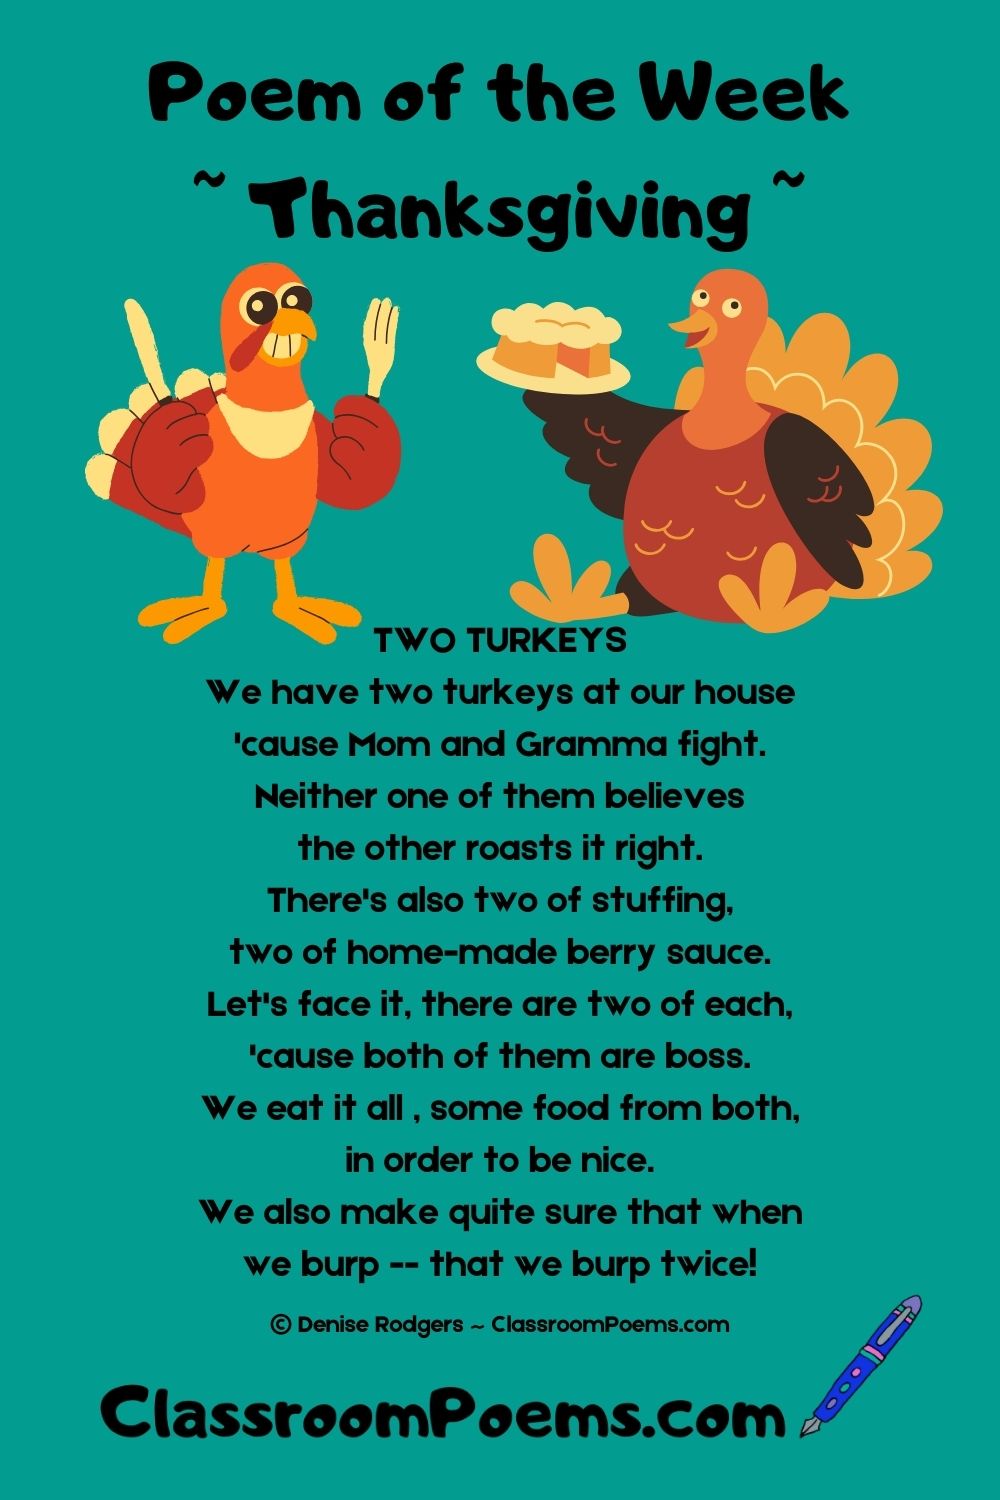 Two Turkeys, a Thanksgiving poem by Denise Rodgers on ClassroomPoems.com.